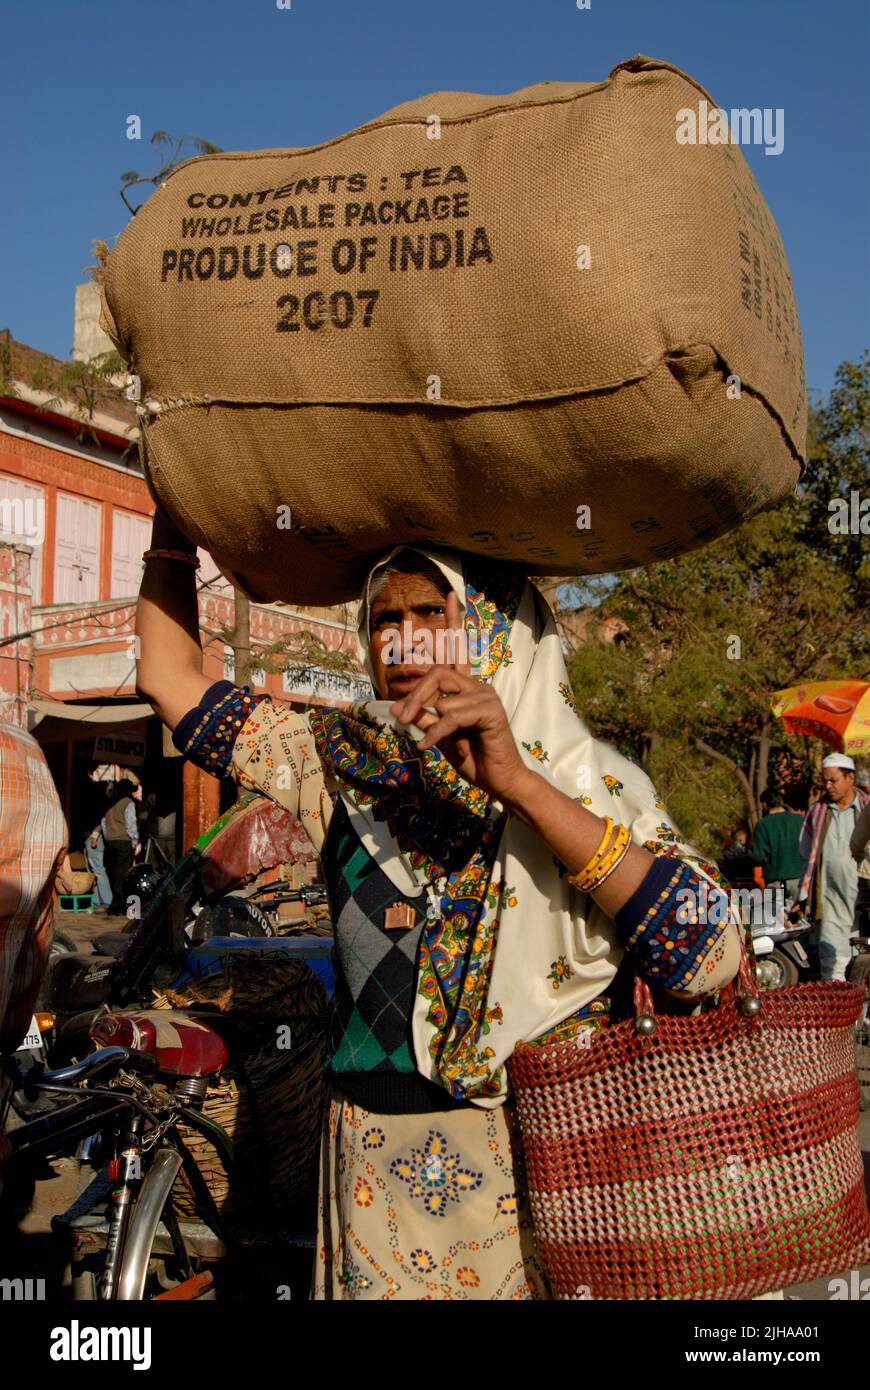 Woman worker carry a sack of tea - product of India Stock Photo